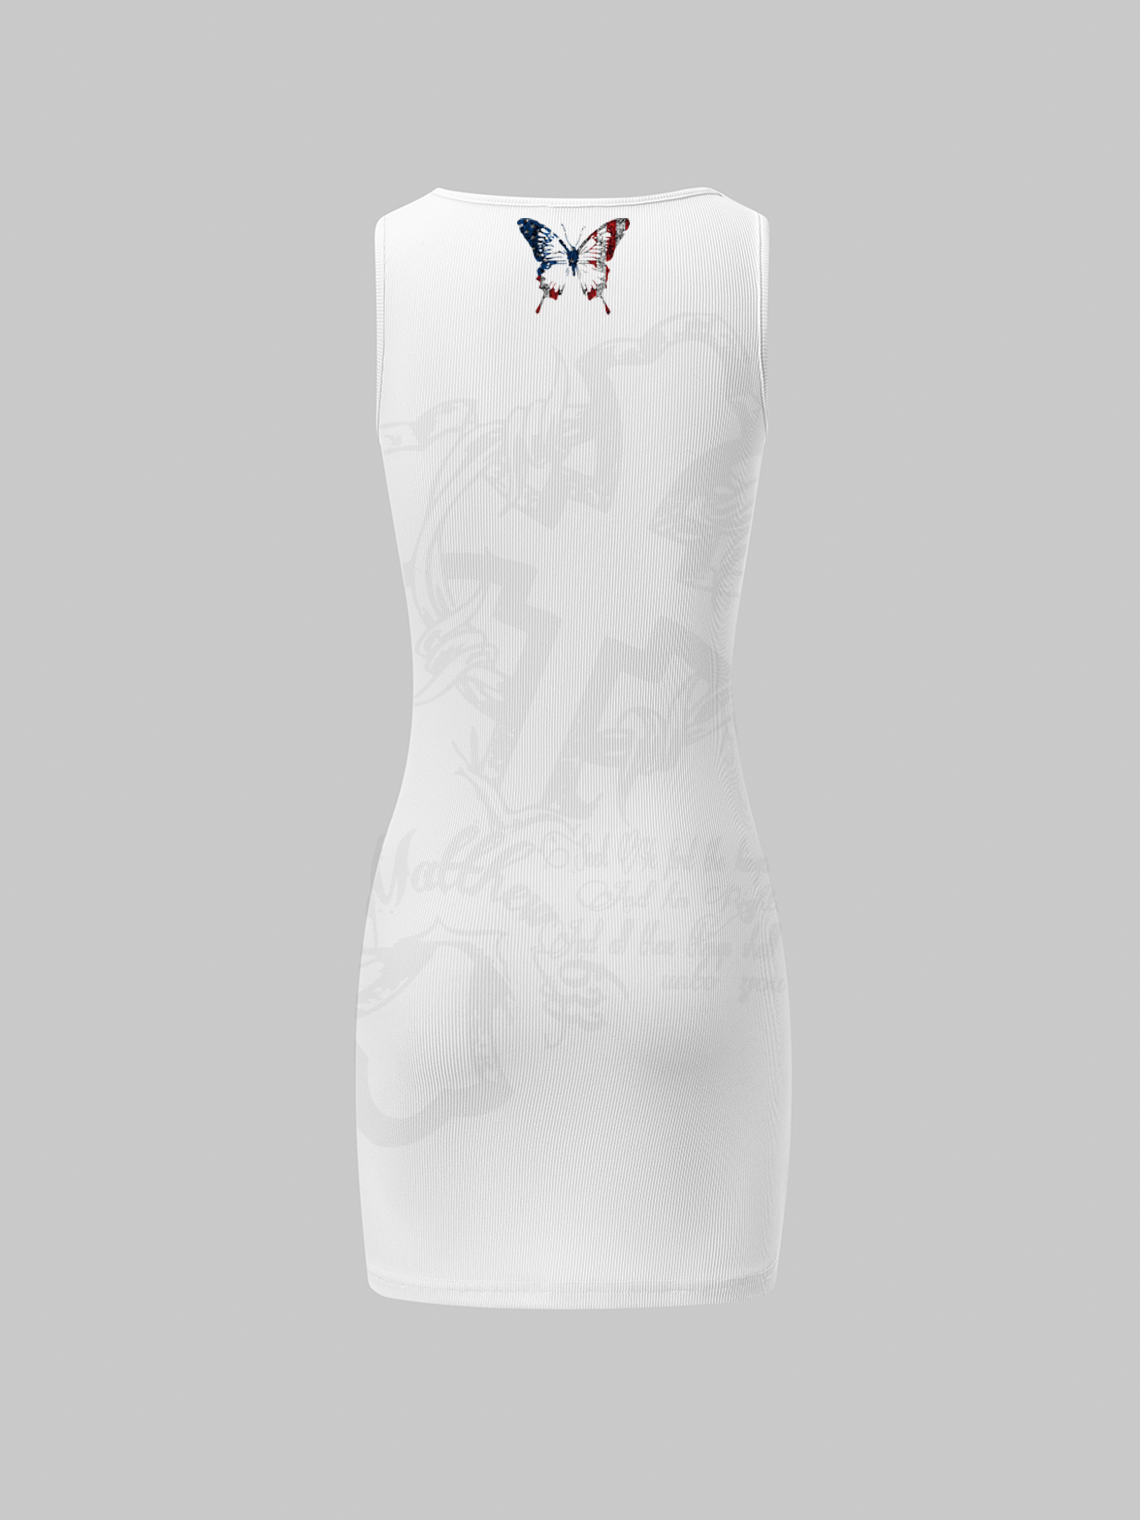 【Final Sale】Y2k White Independence Day Holidays Butterfly Dress Mini Dress